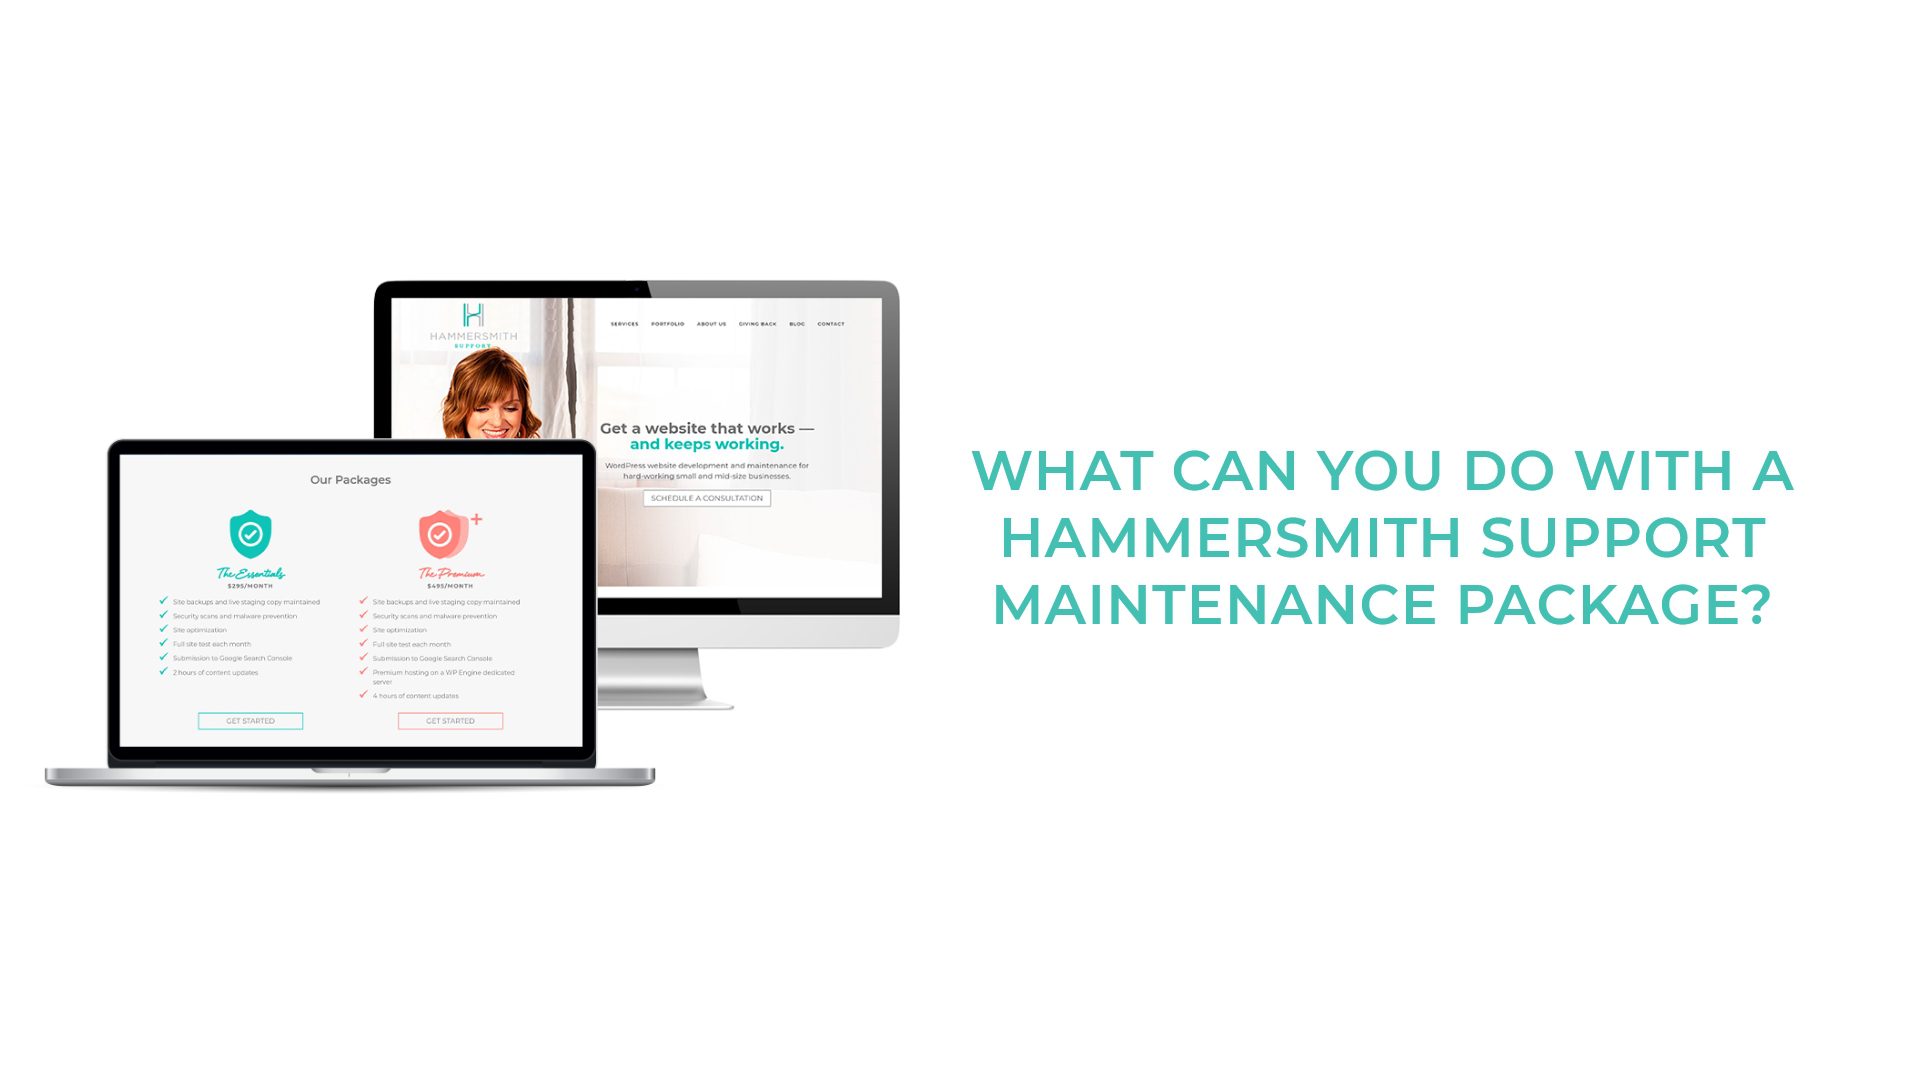 Hammersmith Support Maintenance Packages